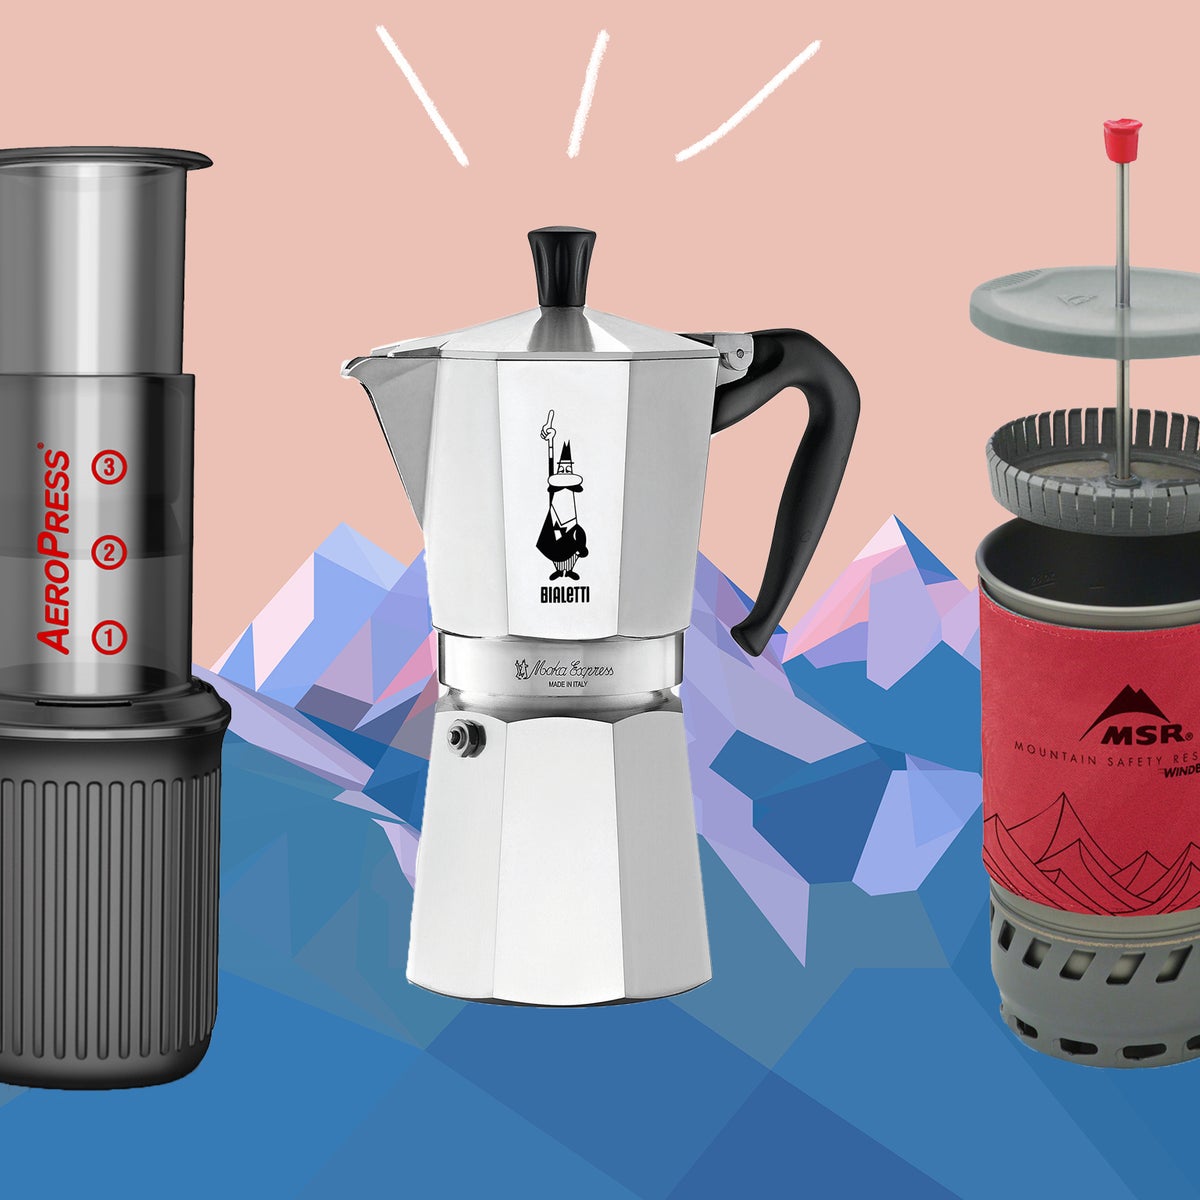 https://static.independent.co.uk/2020/09/29/11/indybest%20best%20portable%20coffee%20maker%20camping.jpg?width=1200&height=1200&fit=crop